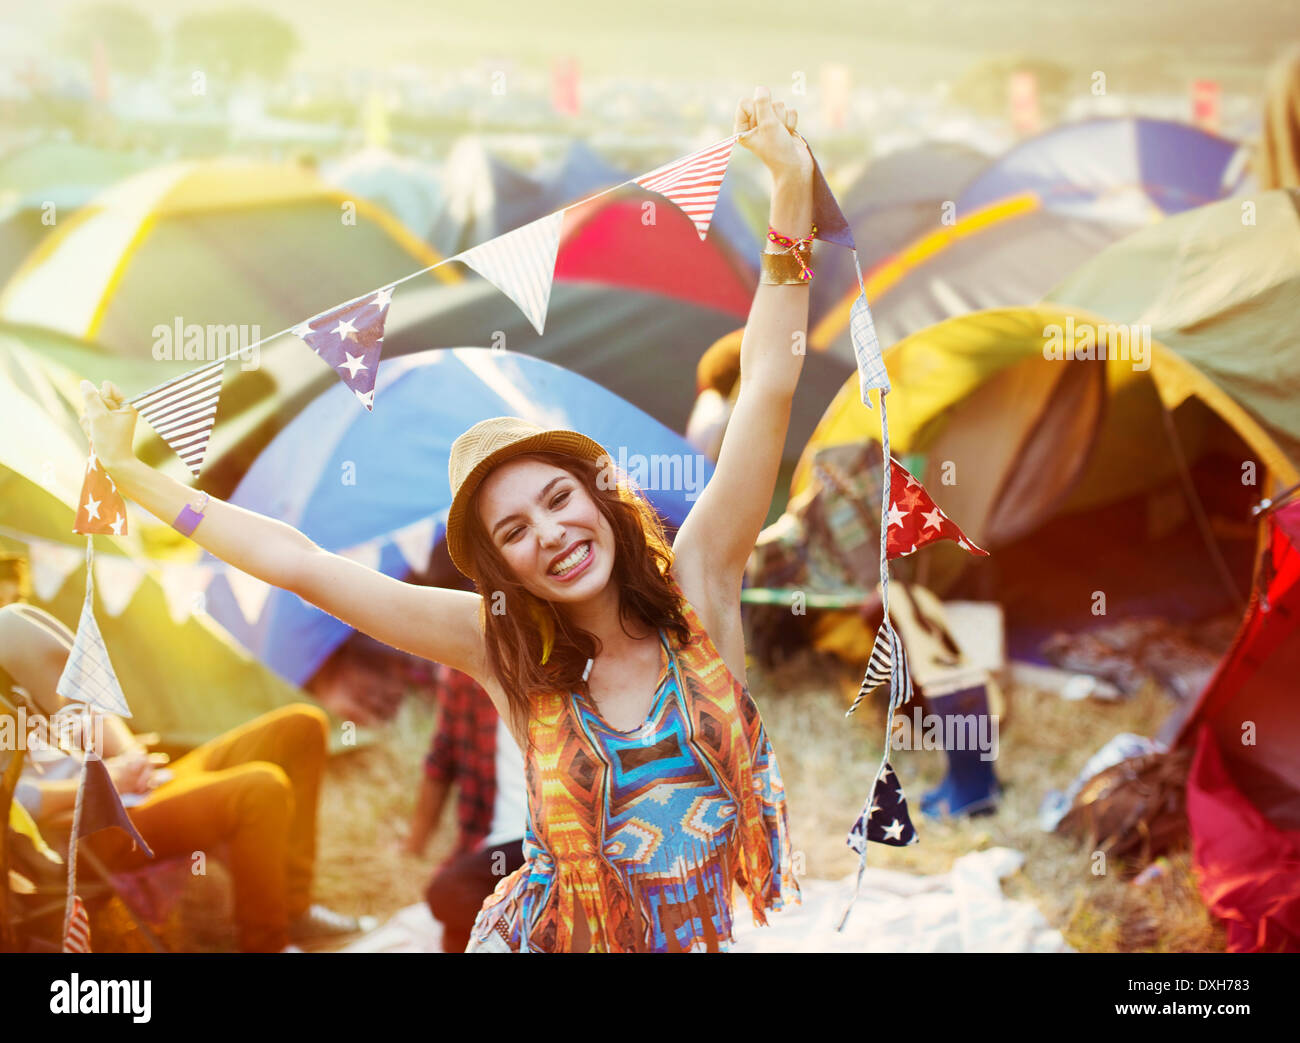 Portrait of enthusiastic woman outside tents at music festival Stock Photo